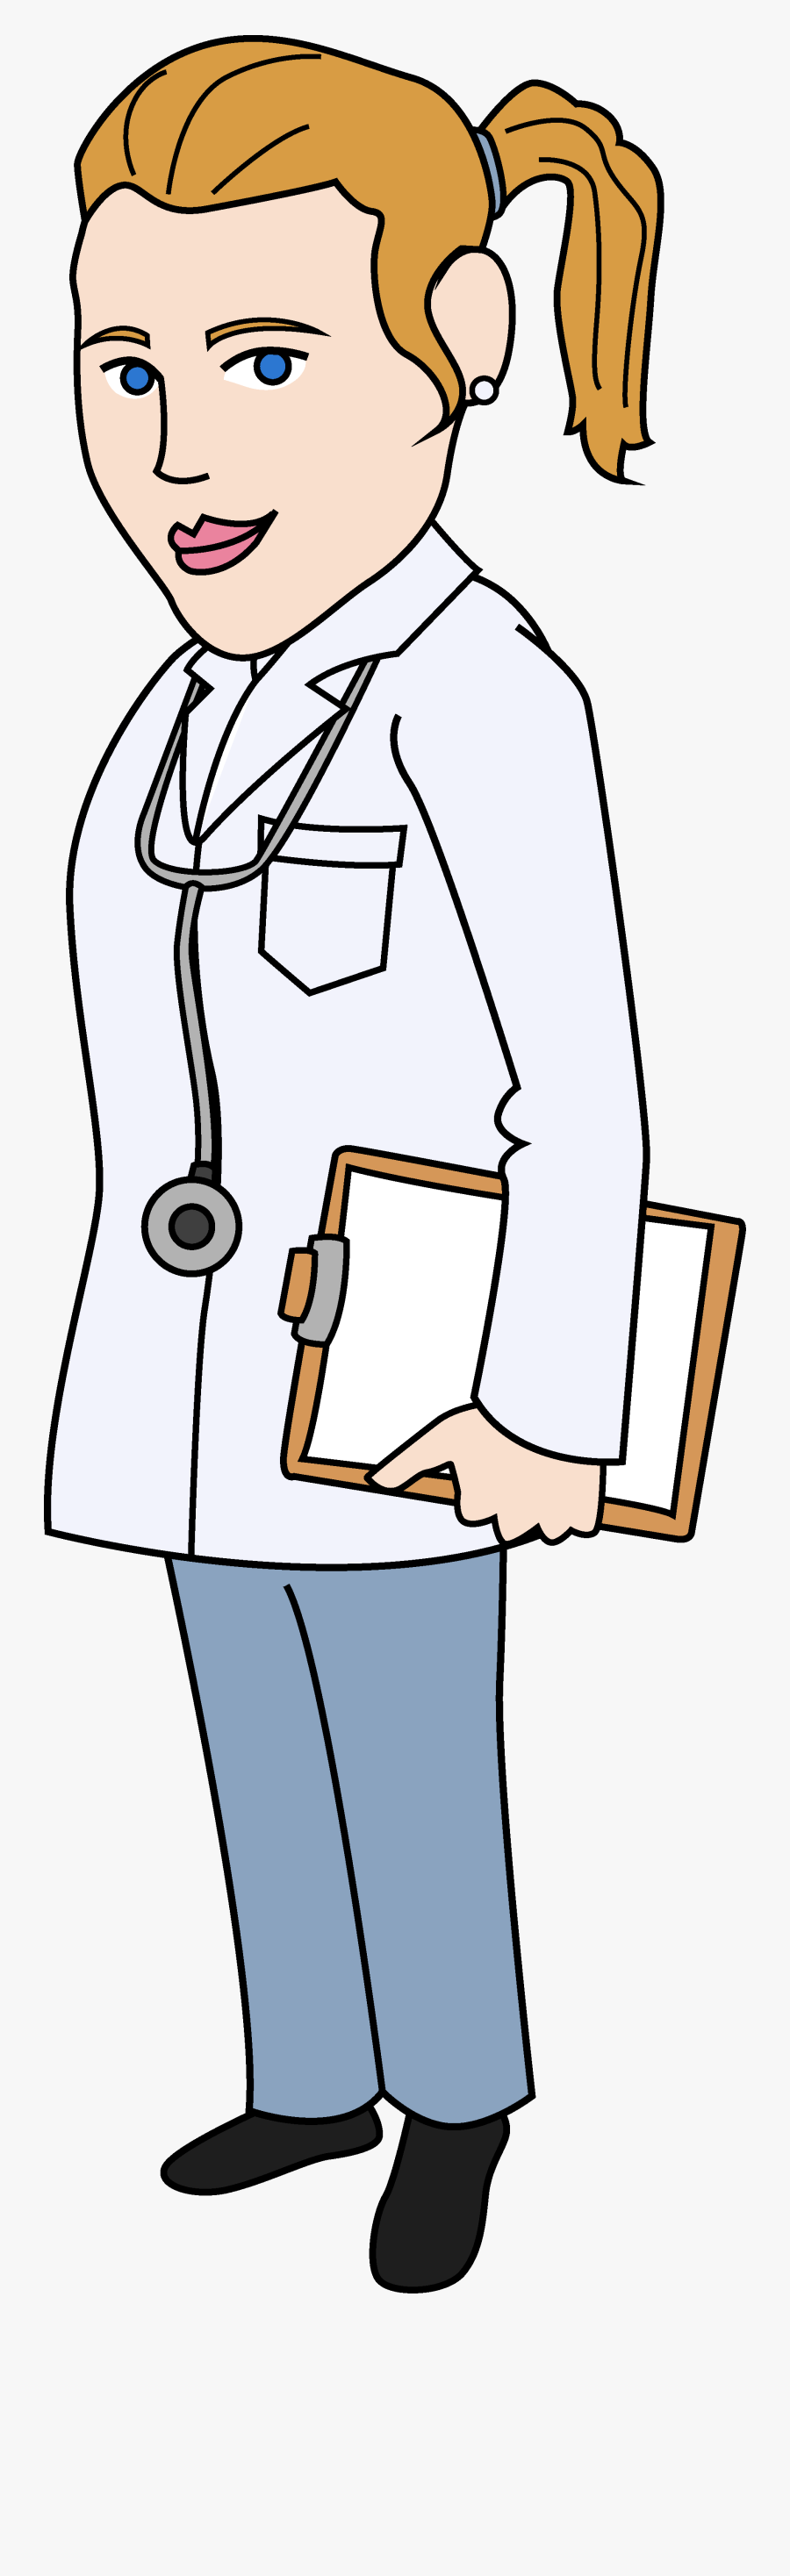 0 Images About Doctor On Doctors Clip Art And Nurses - Doctor Clipart Transparent, Transparent Clipart